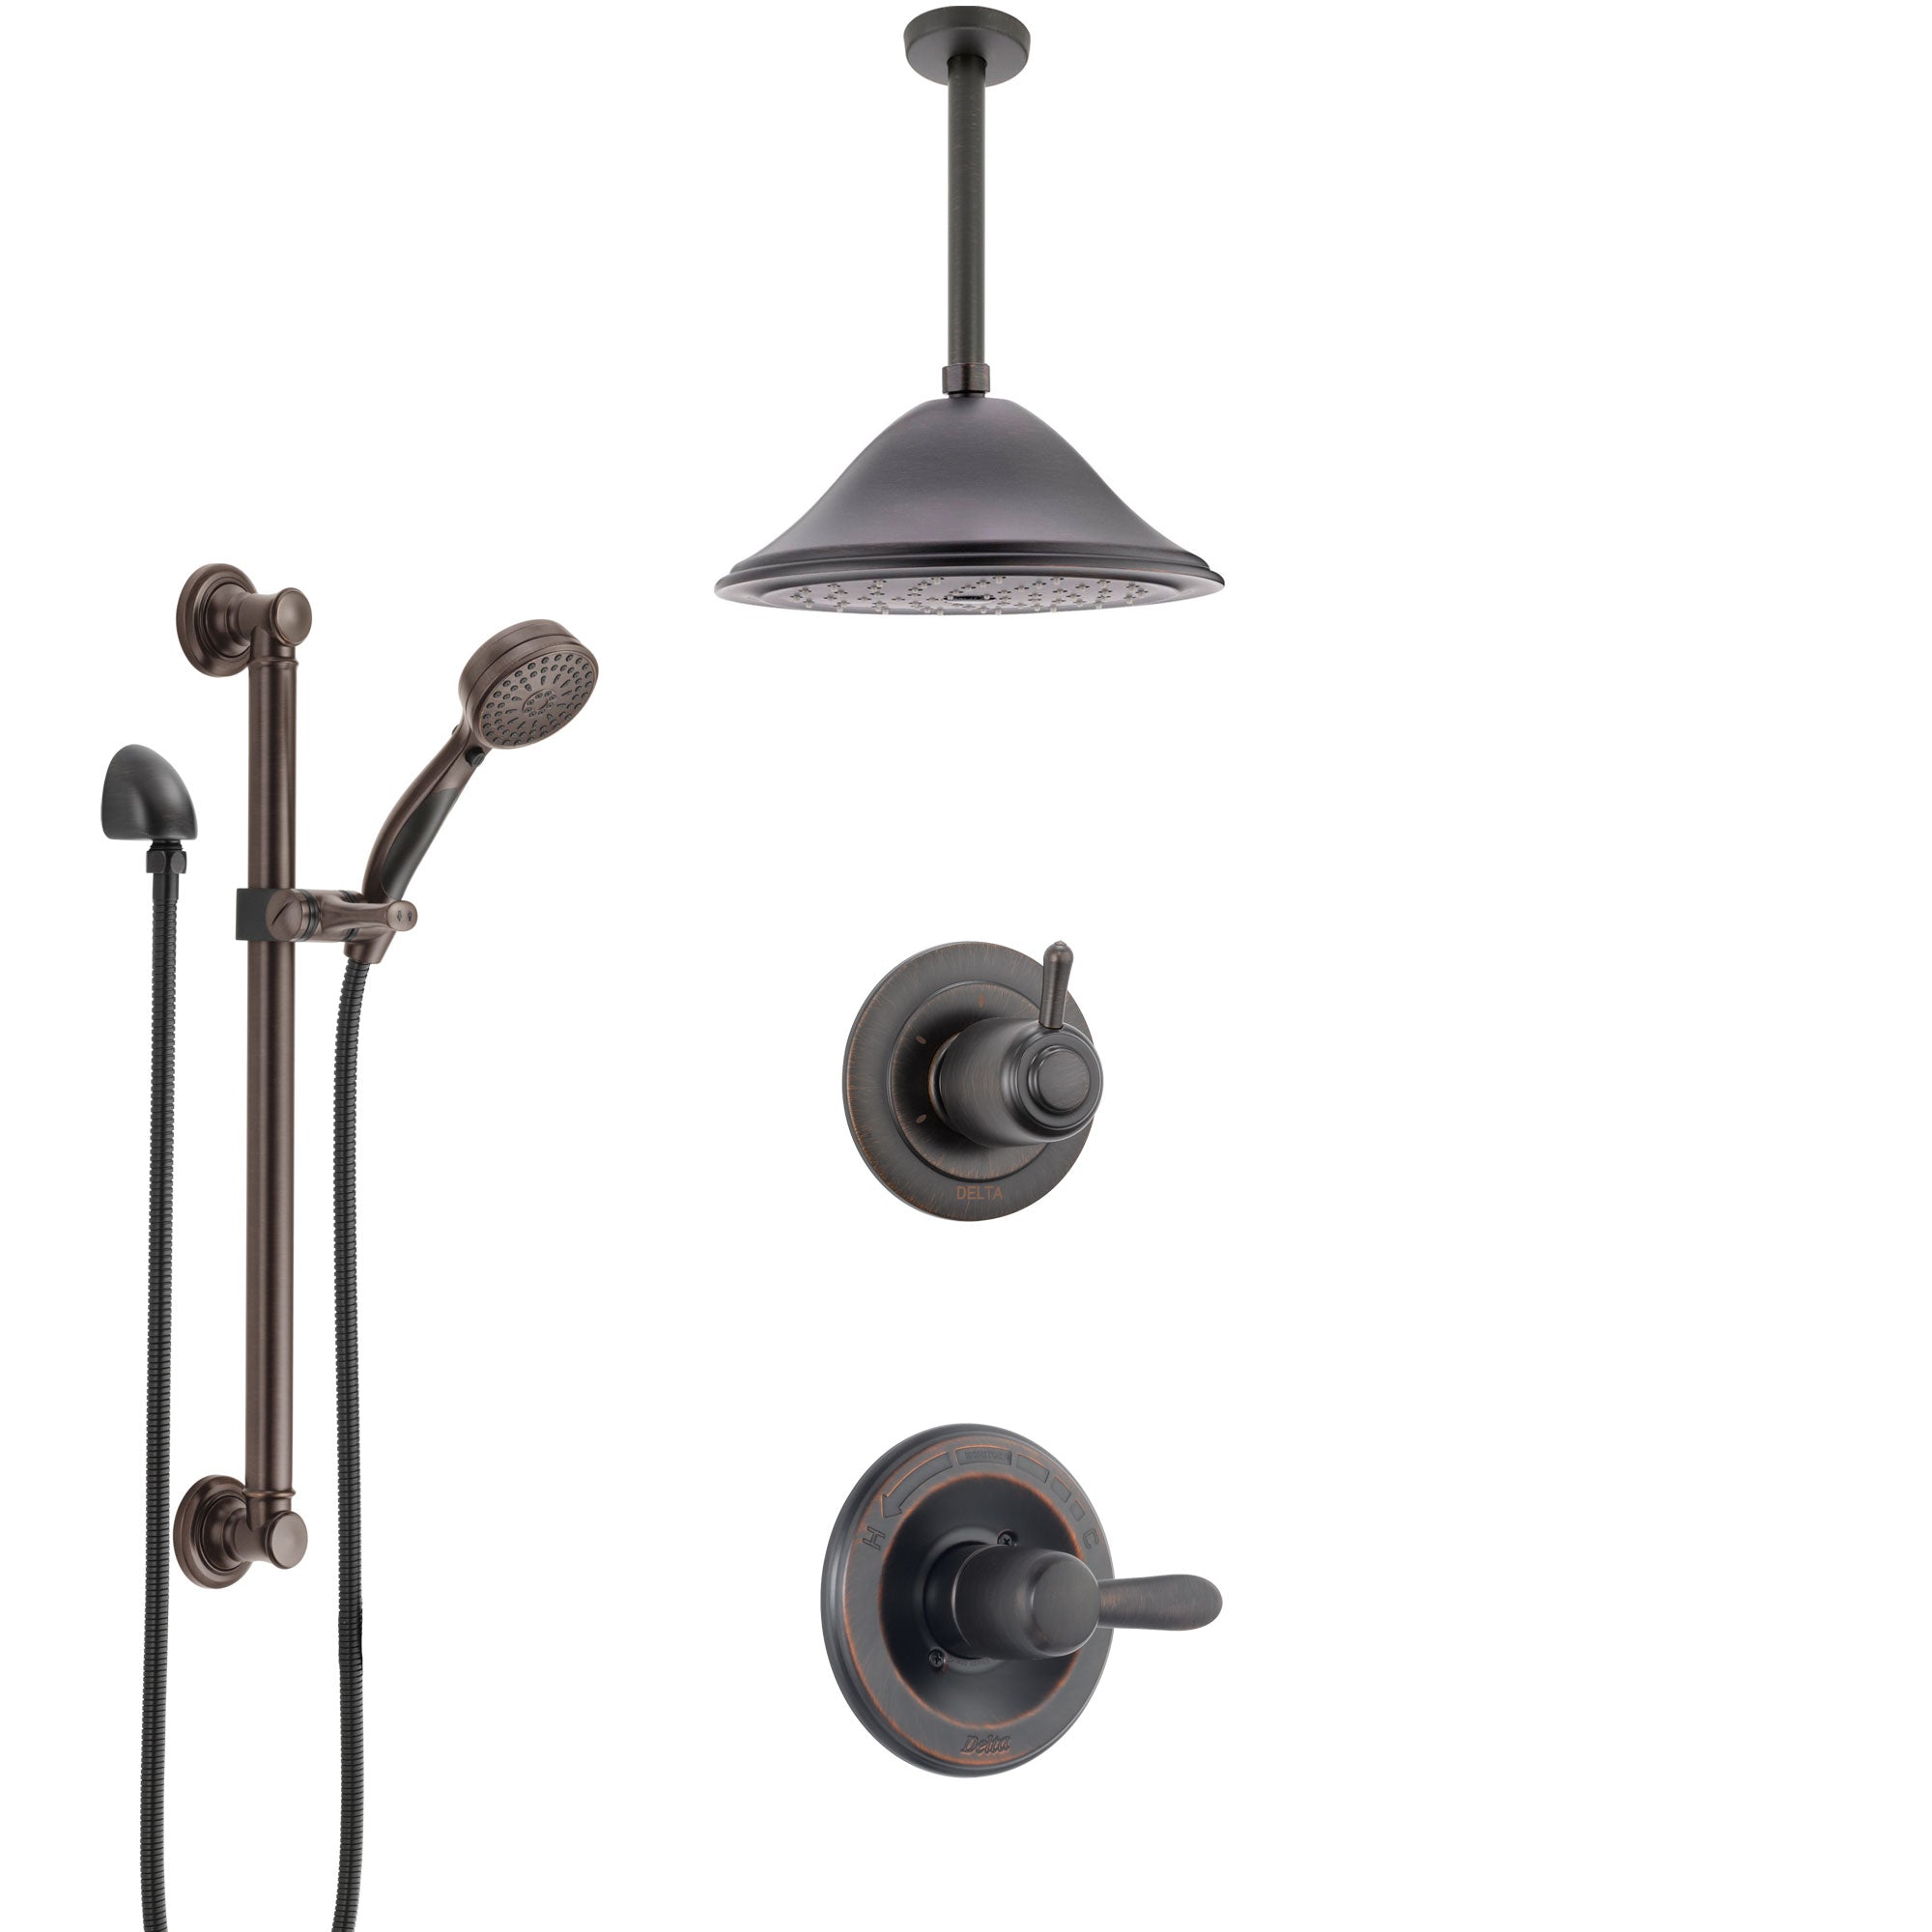 Delta Lahara Venetian Bronze Shower System with Control Handle, 3-Setting Diverter, Ceiling Mount Showerhead, and Hand Shower with Grab Bar SS1438RB8